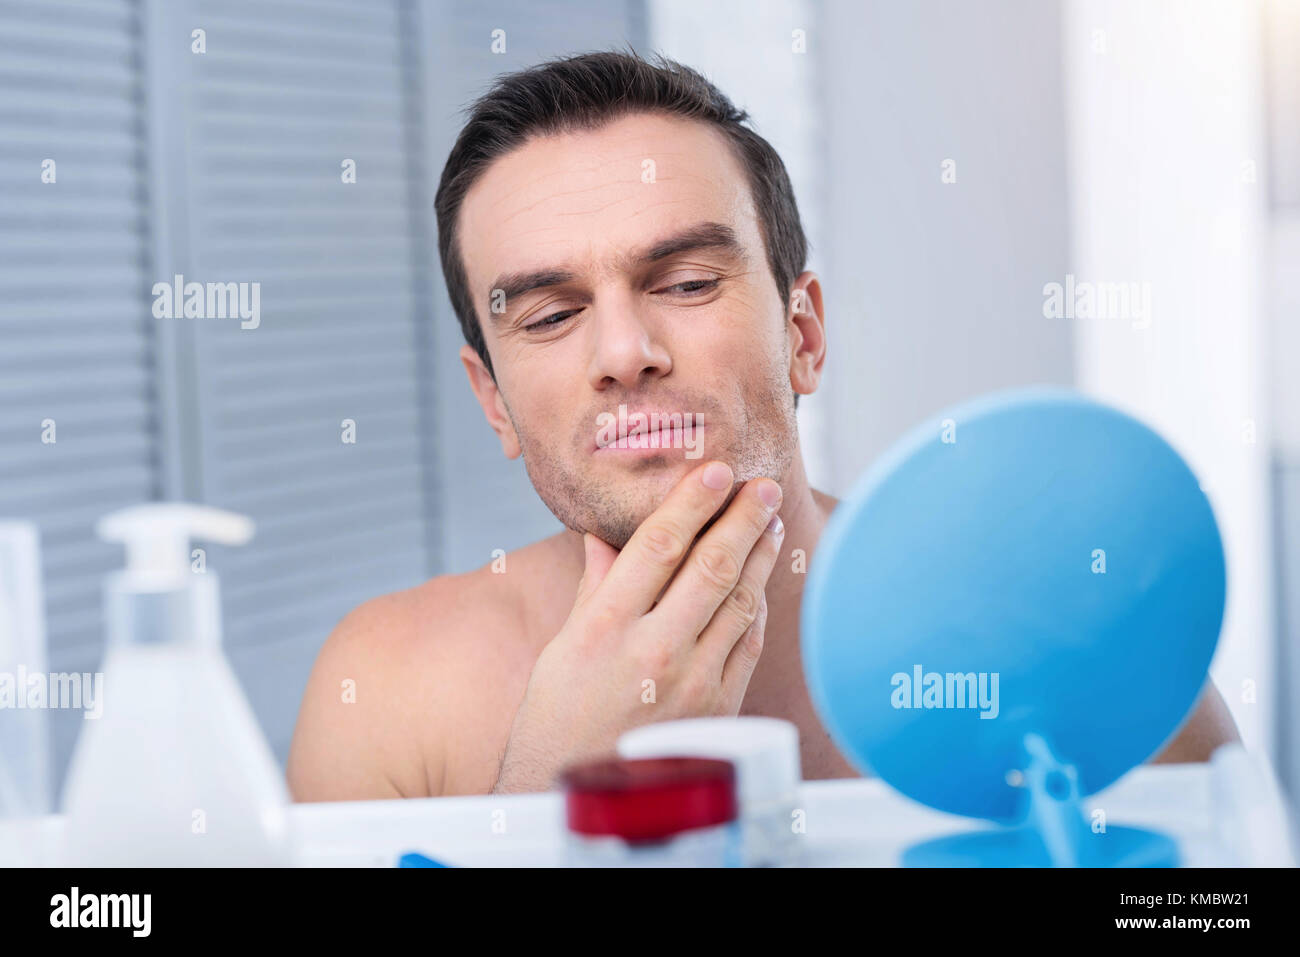 Handsome concentrated man examining his face Stock Photo